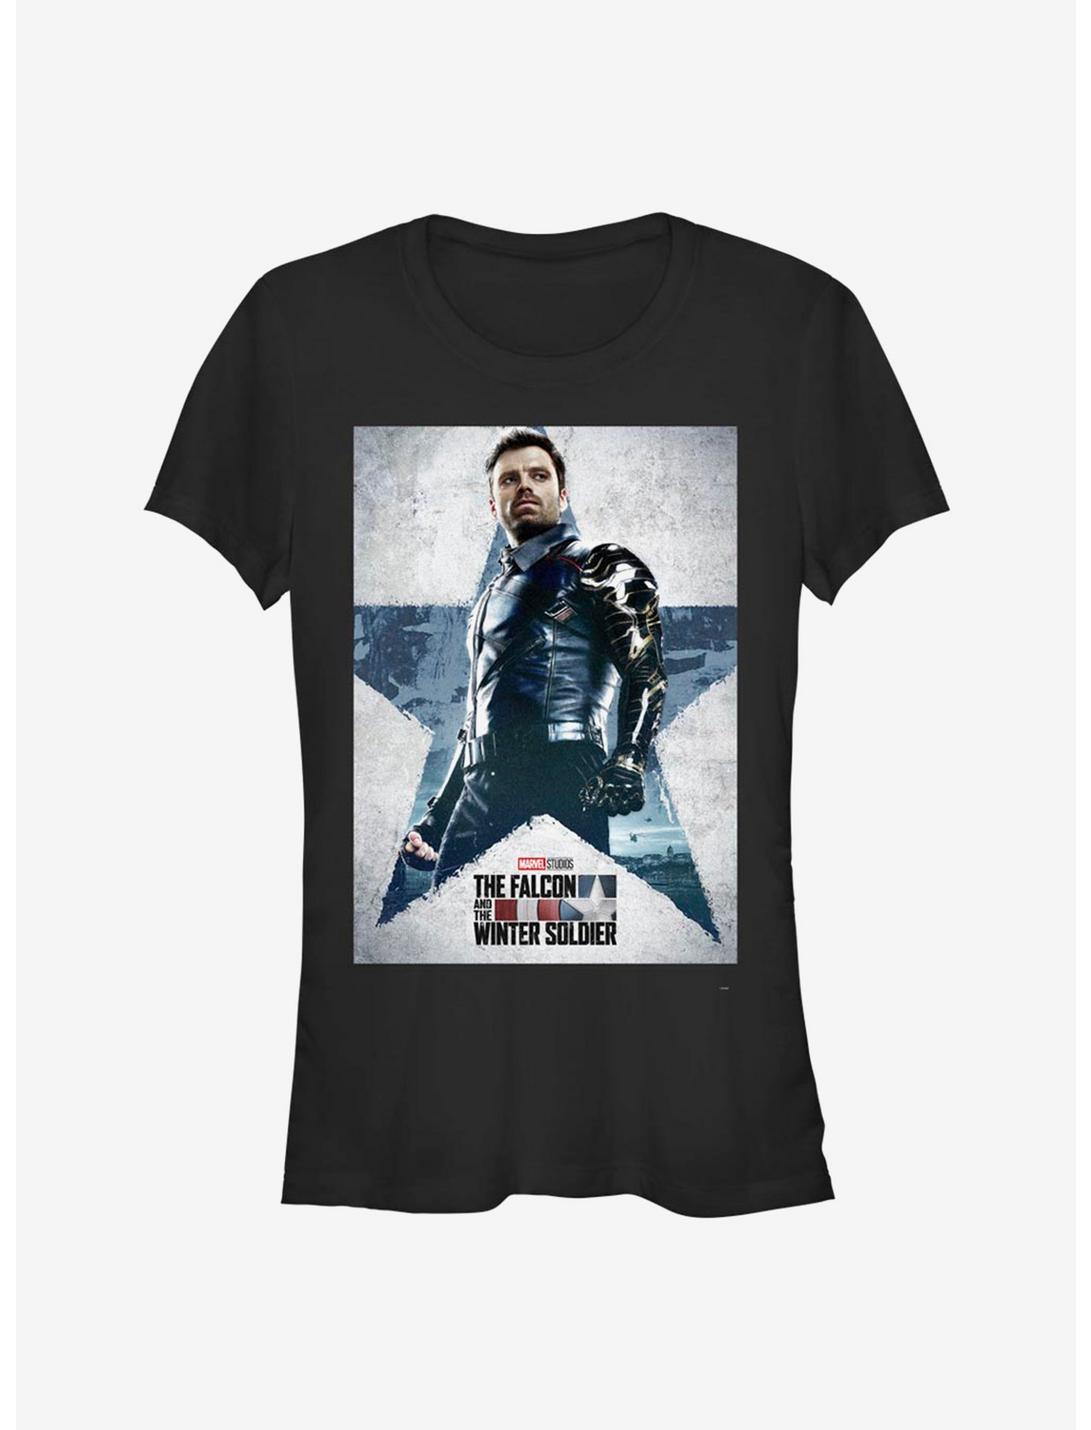 Marvel The Falcon And The Winter Soldier Poster Girls T-Shirt, BLACK, hi-res